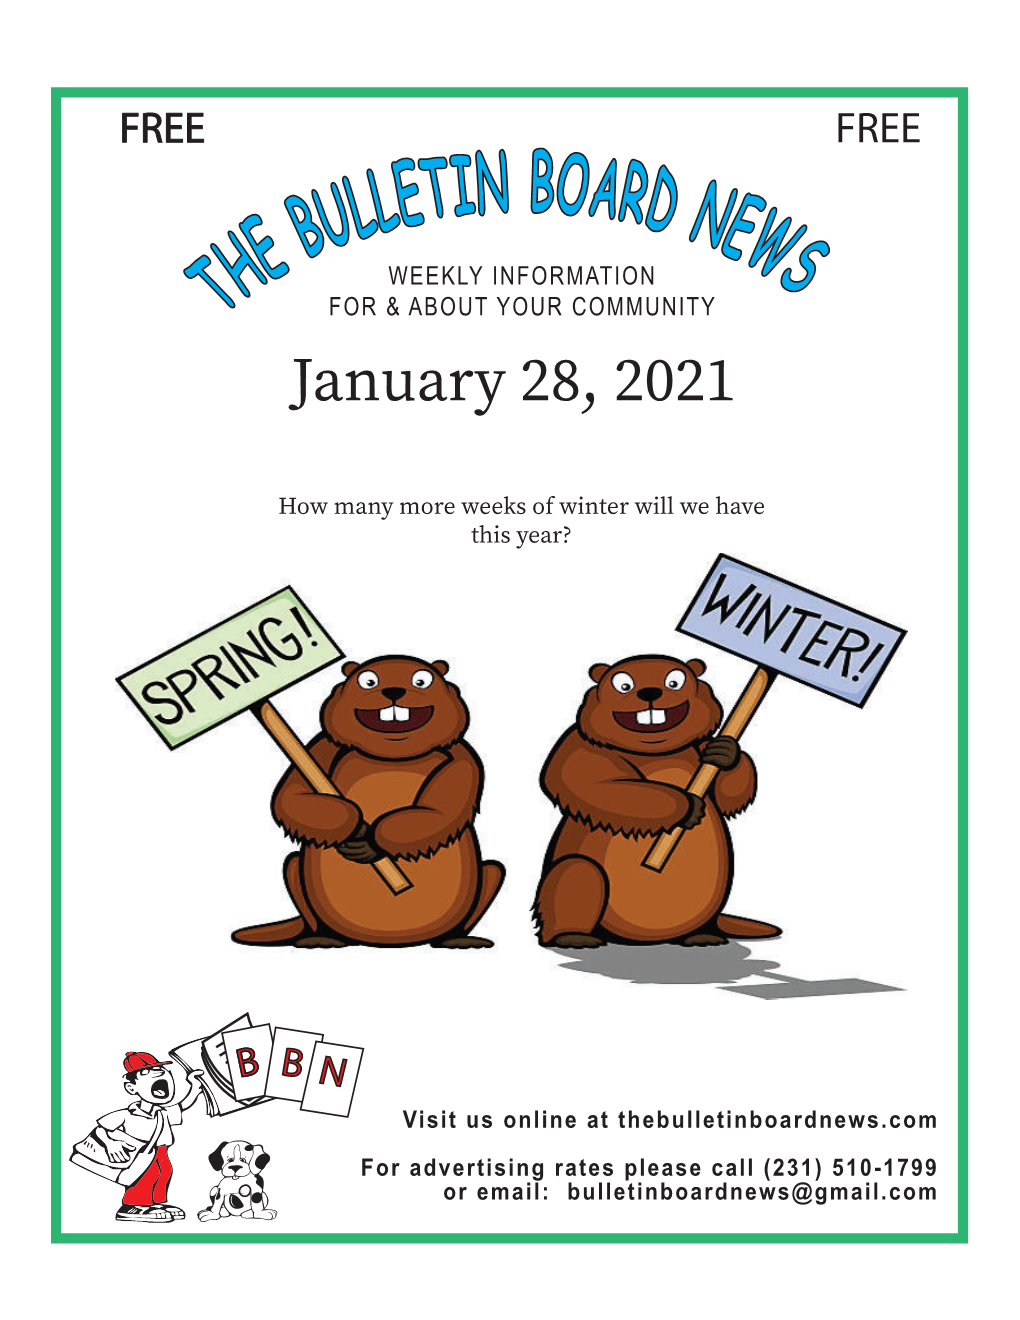 The Bulletin Board News by Advertisers, Organizations and Individuals Is Provided Solely by That Person and May Not Necessarily Be the Opinion of the Publisher